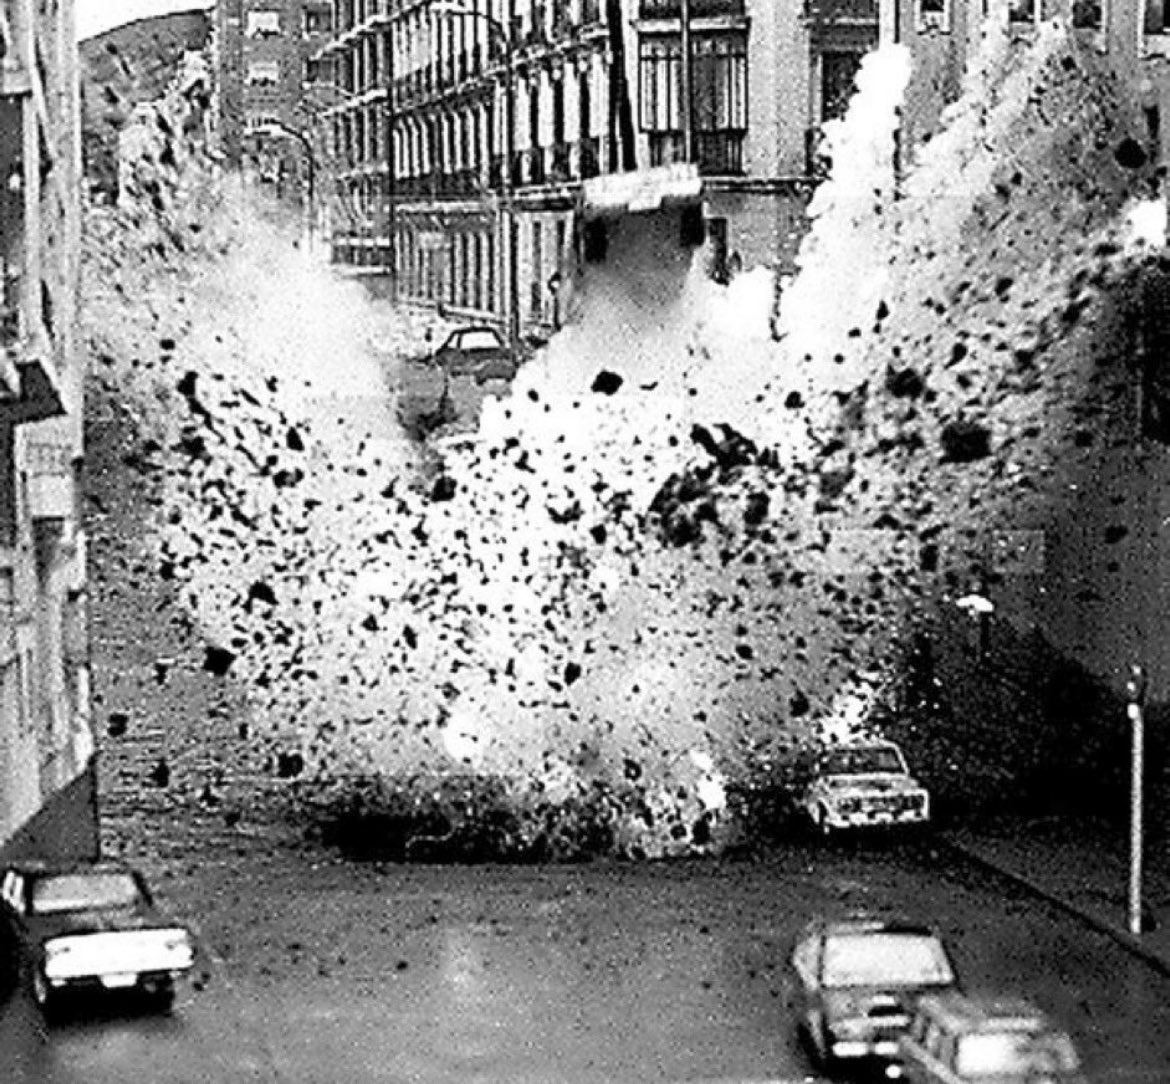 On December 20, 1973, Spanish Prime Minister Luis Carrero Blanco was assassinated in Madrid. Basque separatist group ETA meticulously dug a tunnel under a road Blanco used to attend mass over five months. 

When he drove over, they triggered a bomb, propelling his car 20 meters…